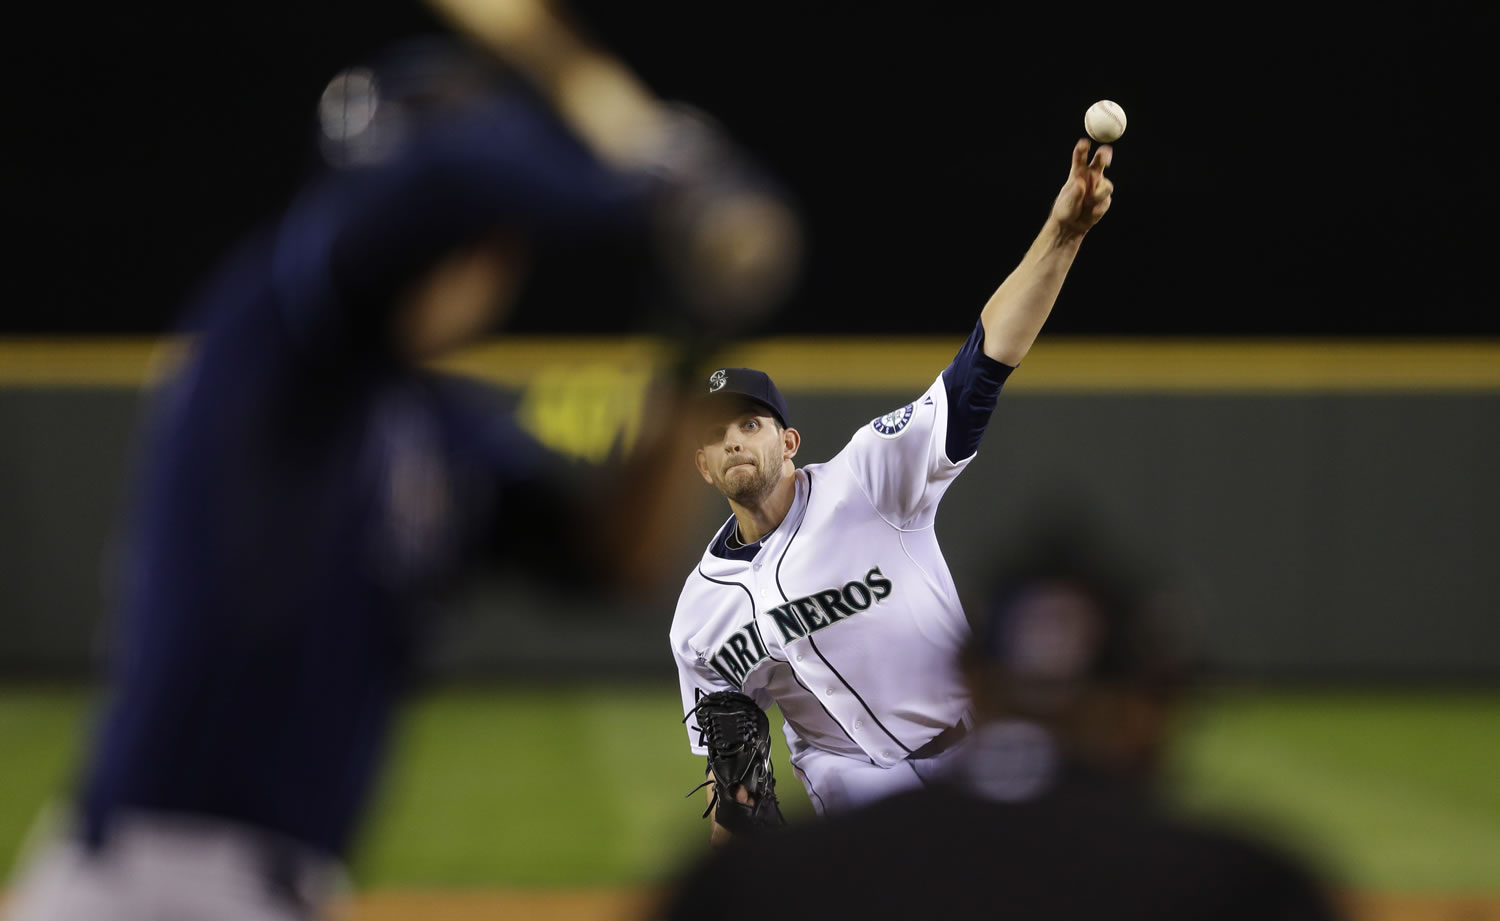 Seattle Mariners starting pitcher James Paxton allowed just one earned run in his major league debut on Saturday as the Mariners beat the Tampa Bay Rays, 6-2.